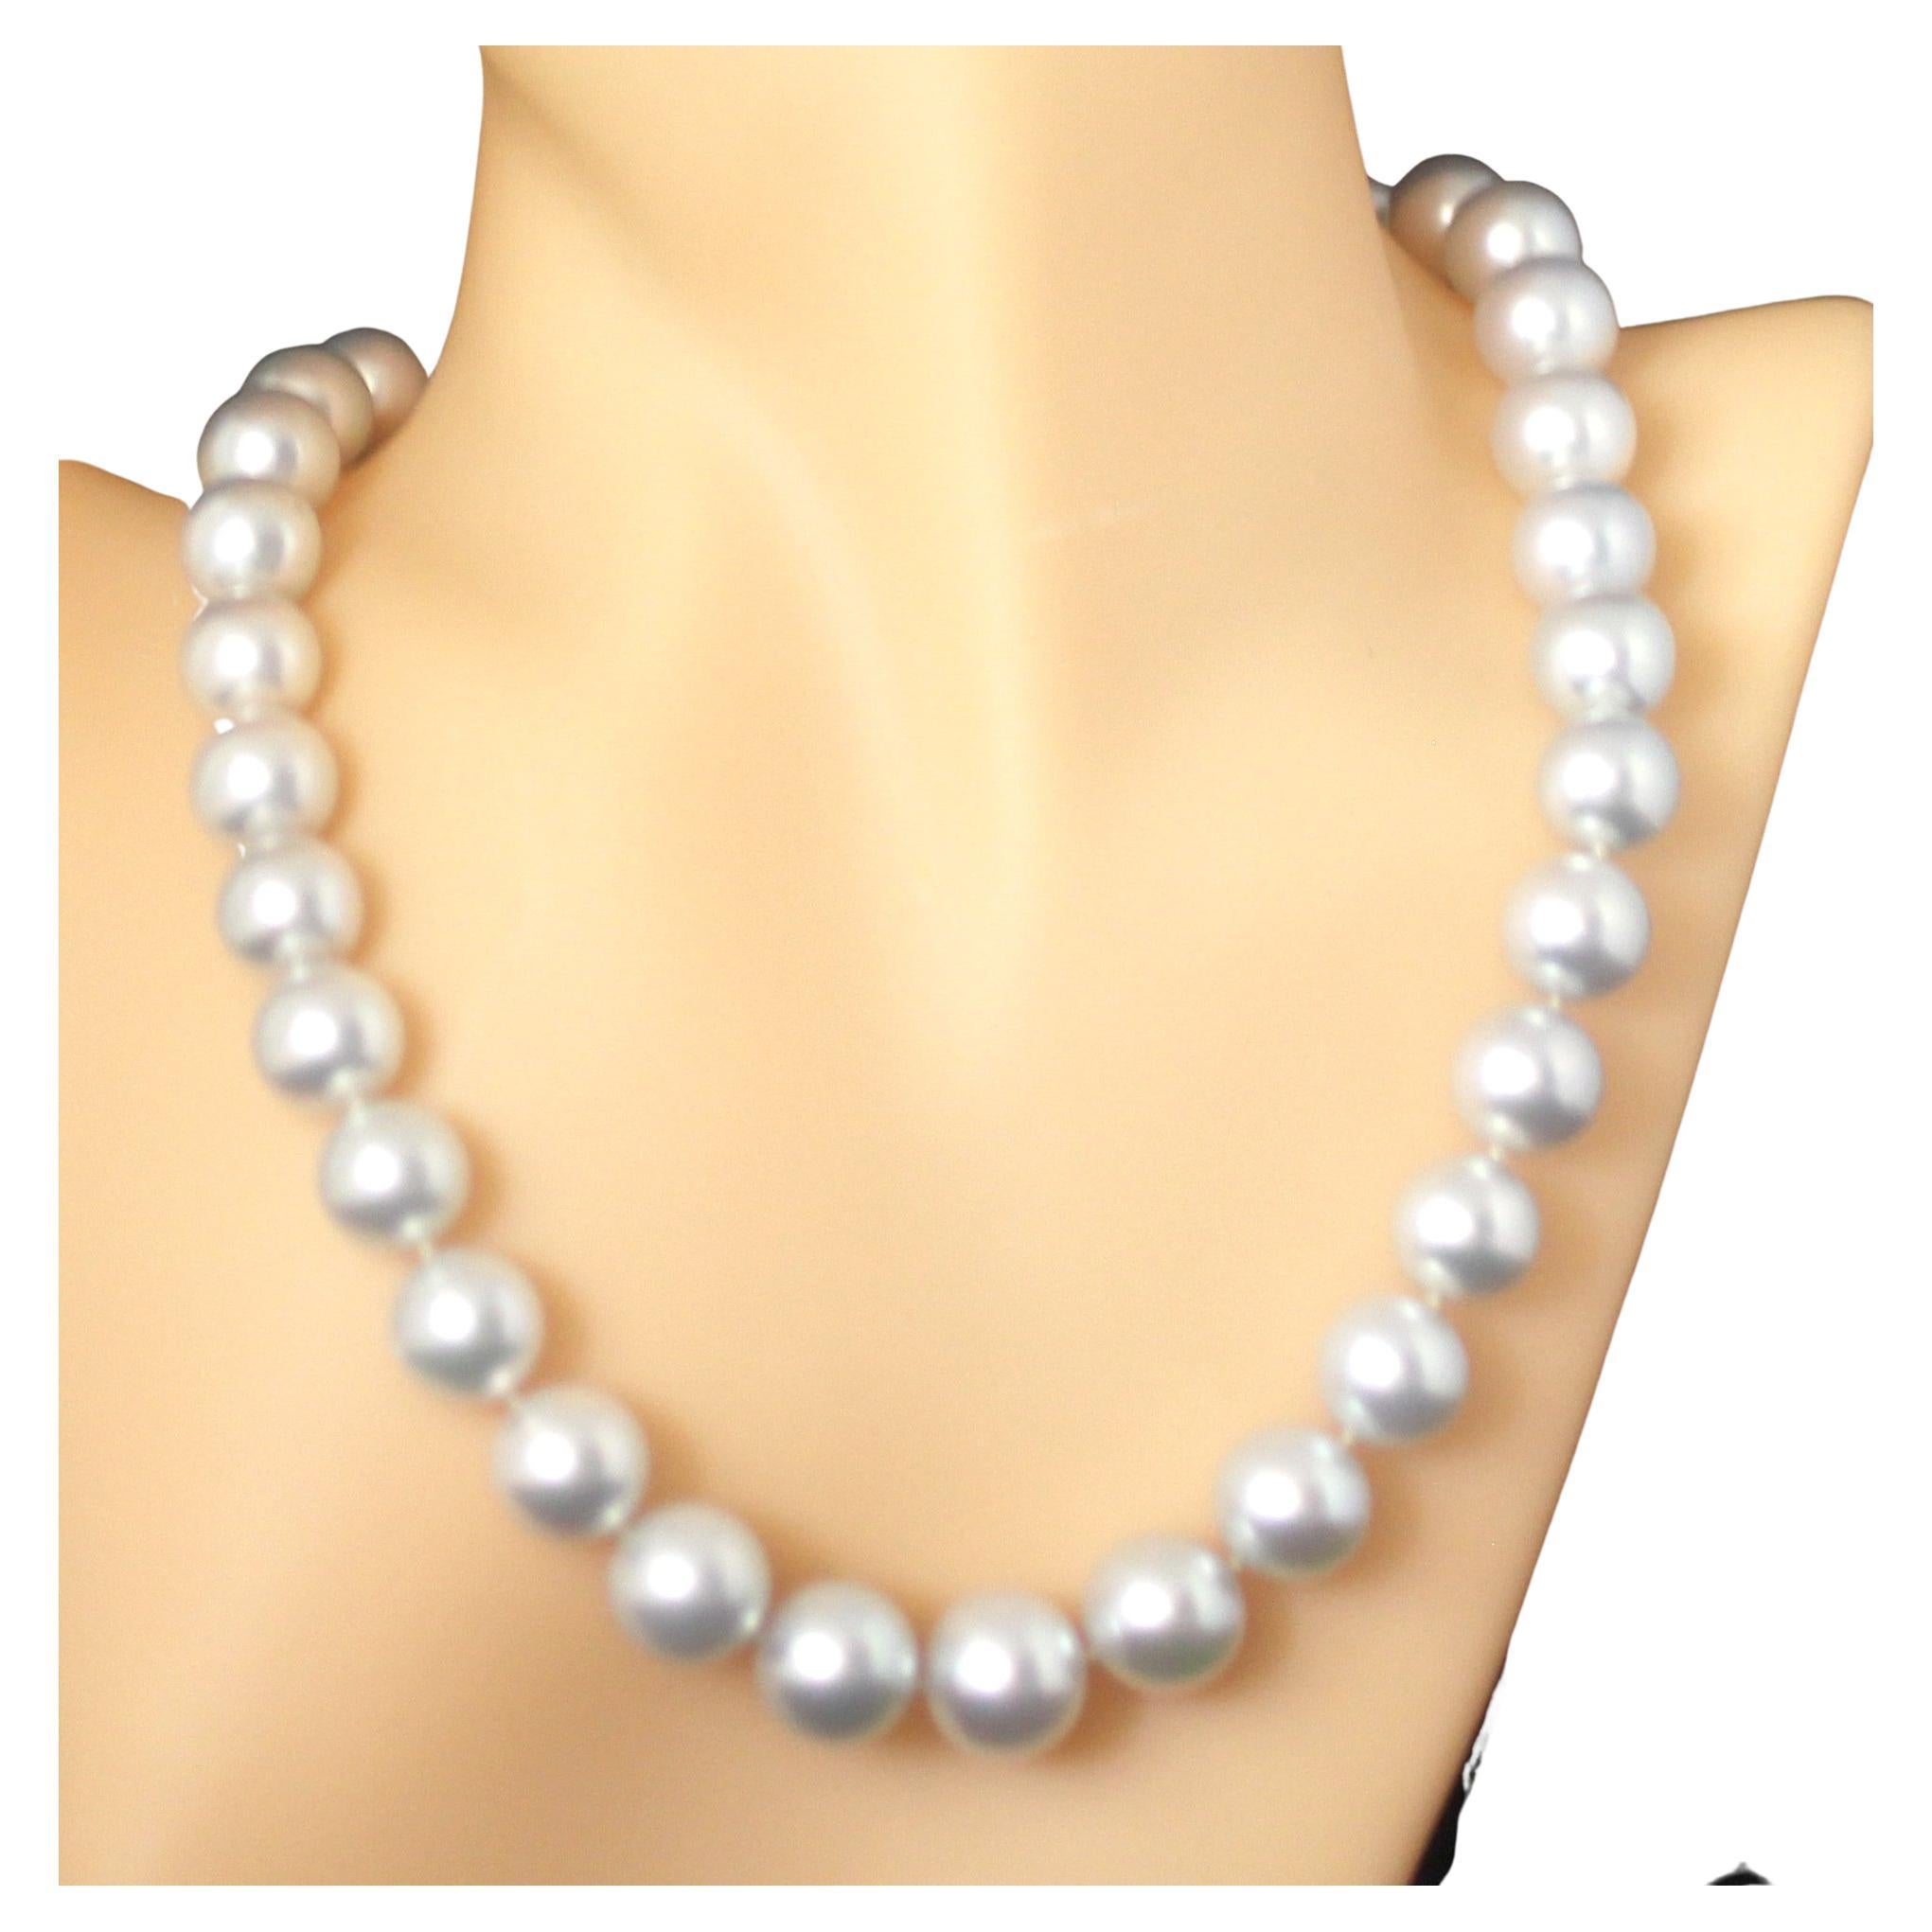 Hakimoto By Jewel Of Ocean 18K South Sea Strand Necklace
18K White Gold  
Weight (g): 86
Cultured South Sea Pearl 
Pearl Size: 11X13mm 
Pearl Shape: Round 
Body color: White 
Orient: Very Good
Luster: Very Good 
Surface: eye Clean
Nacre: Very